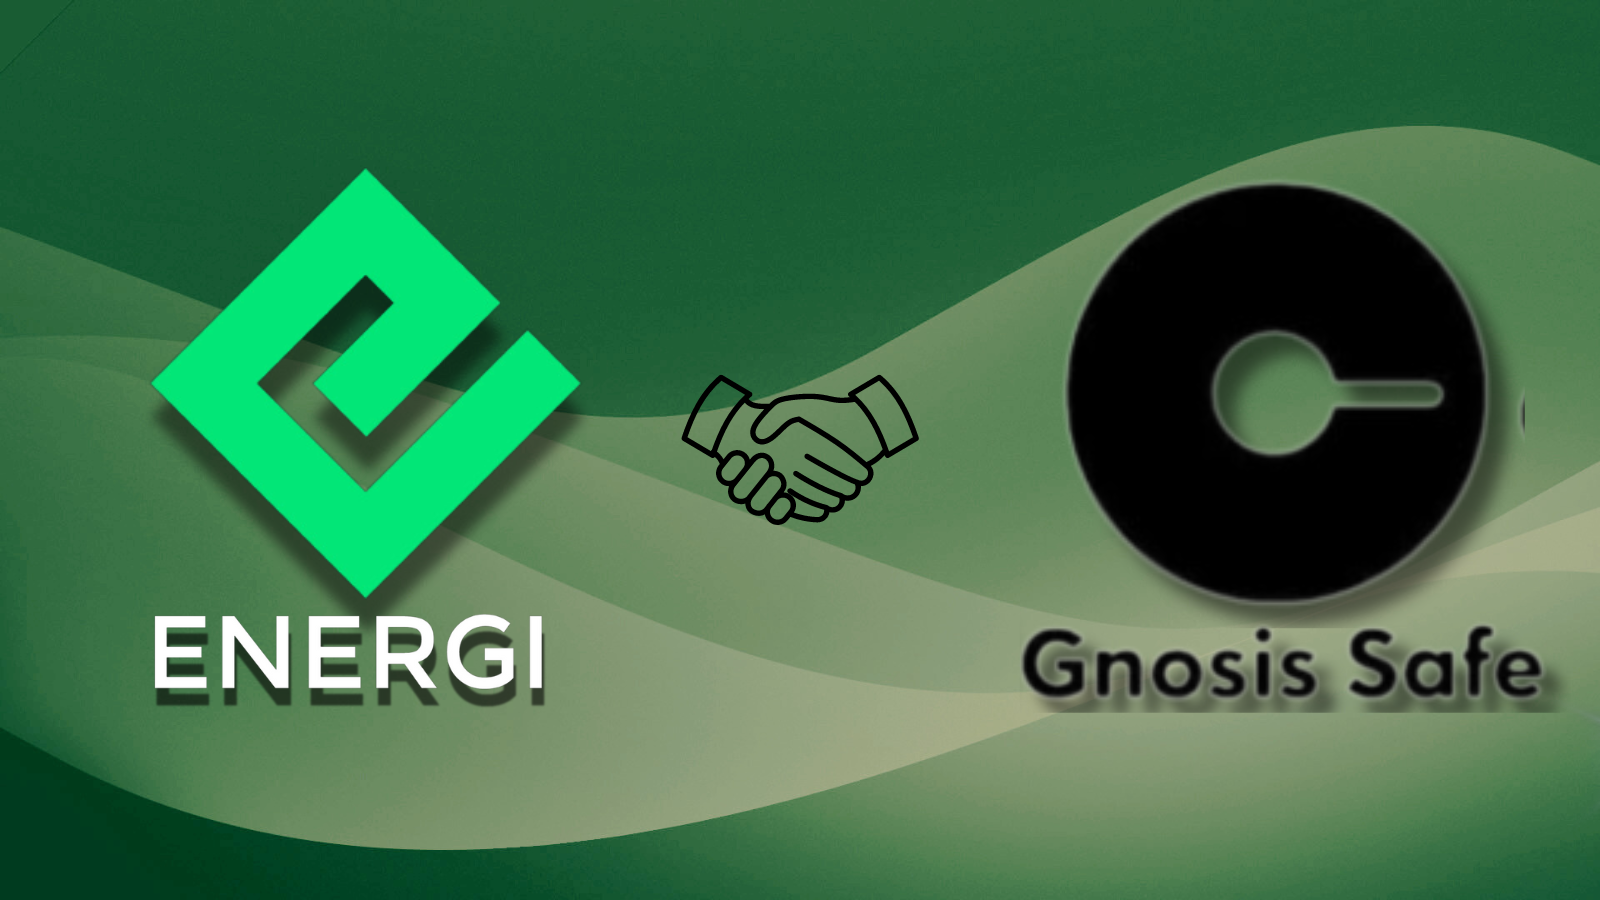 Energi Review (NRG): Should You Consider It? What You Need to Know